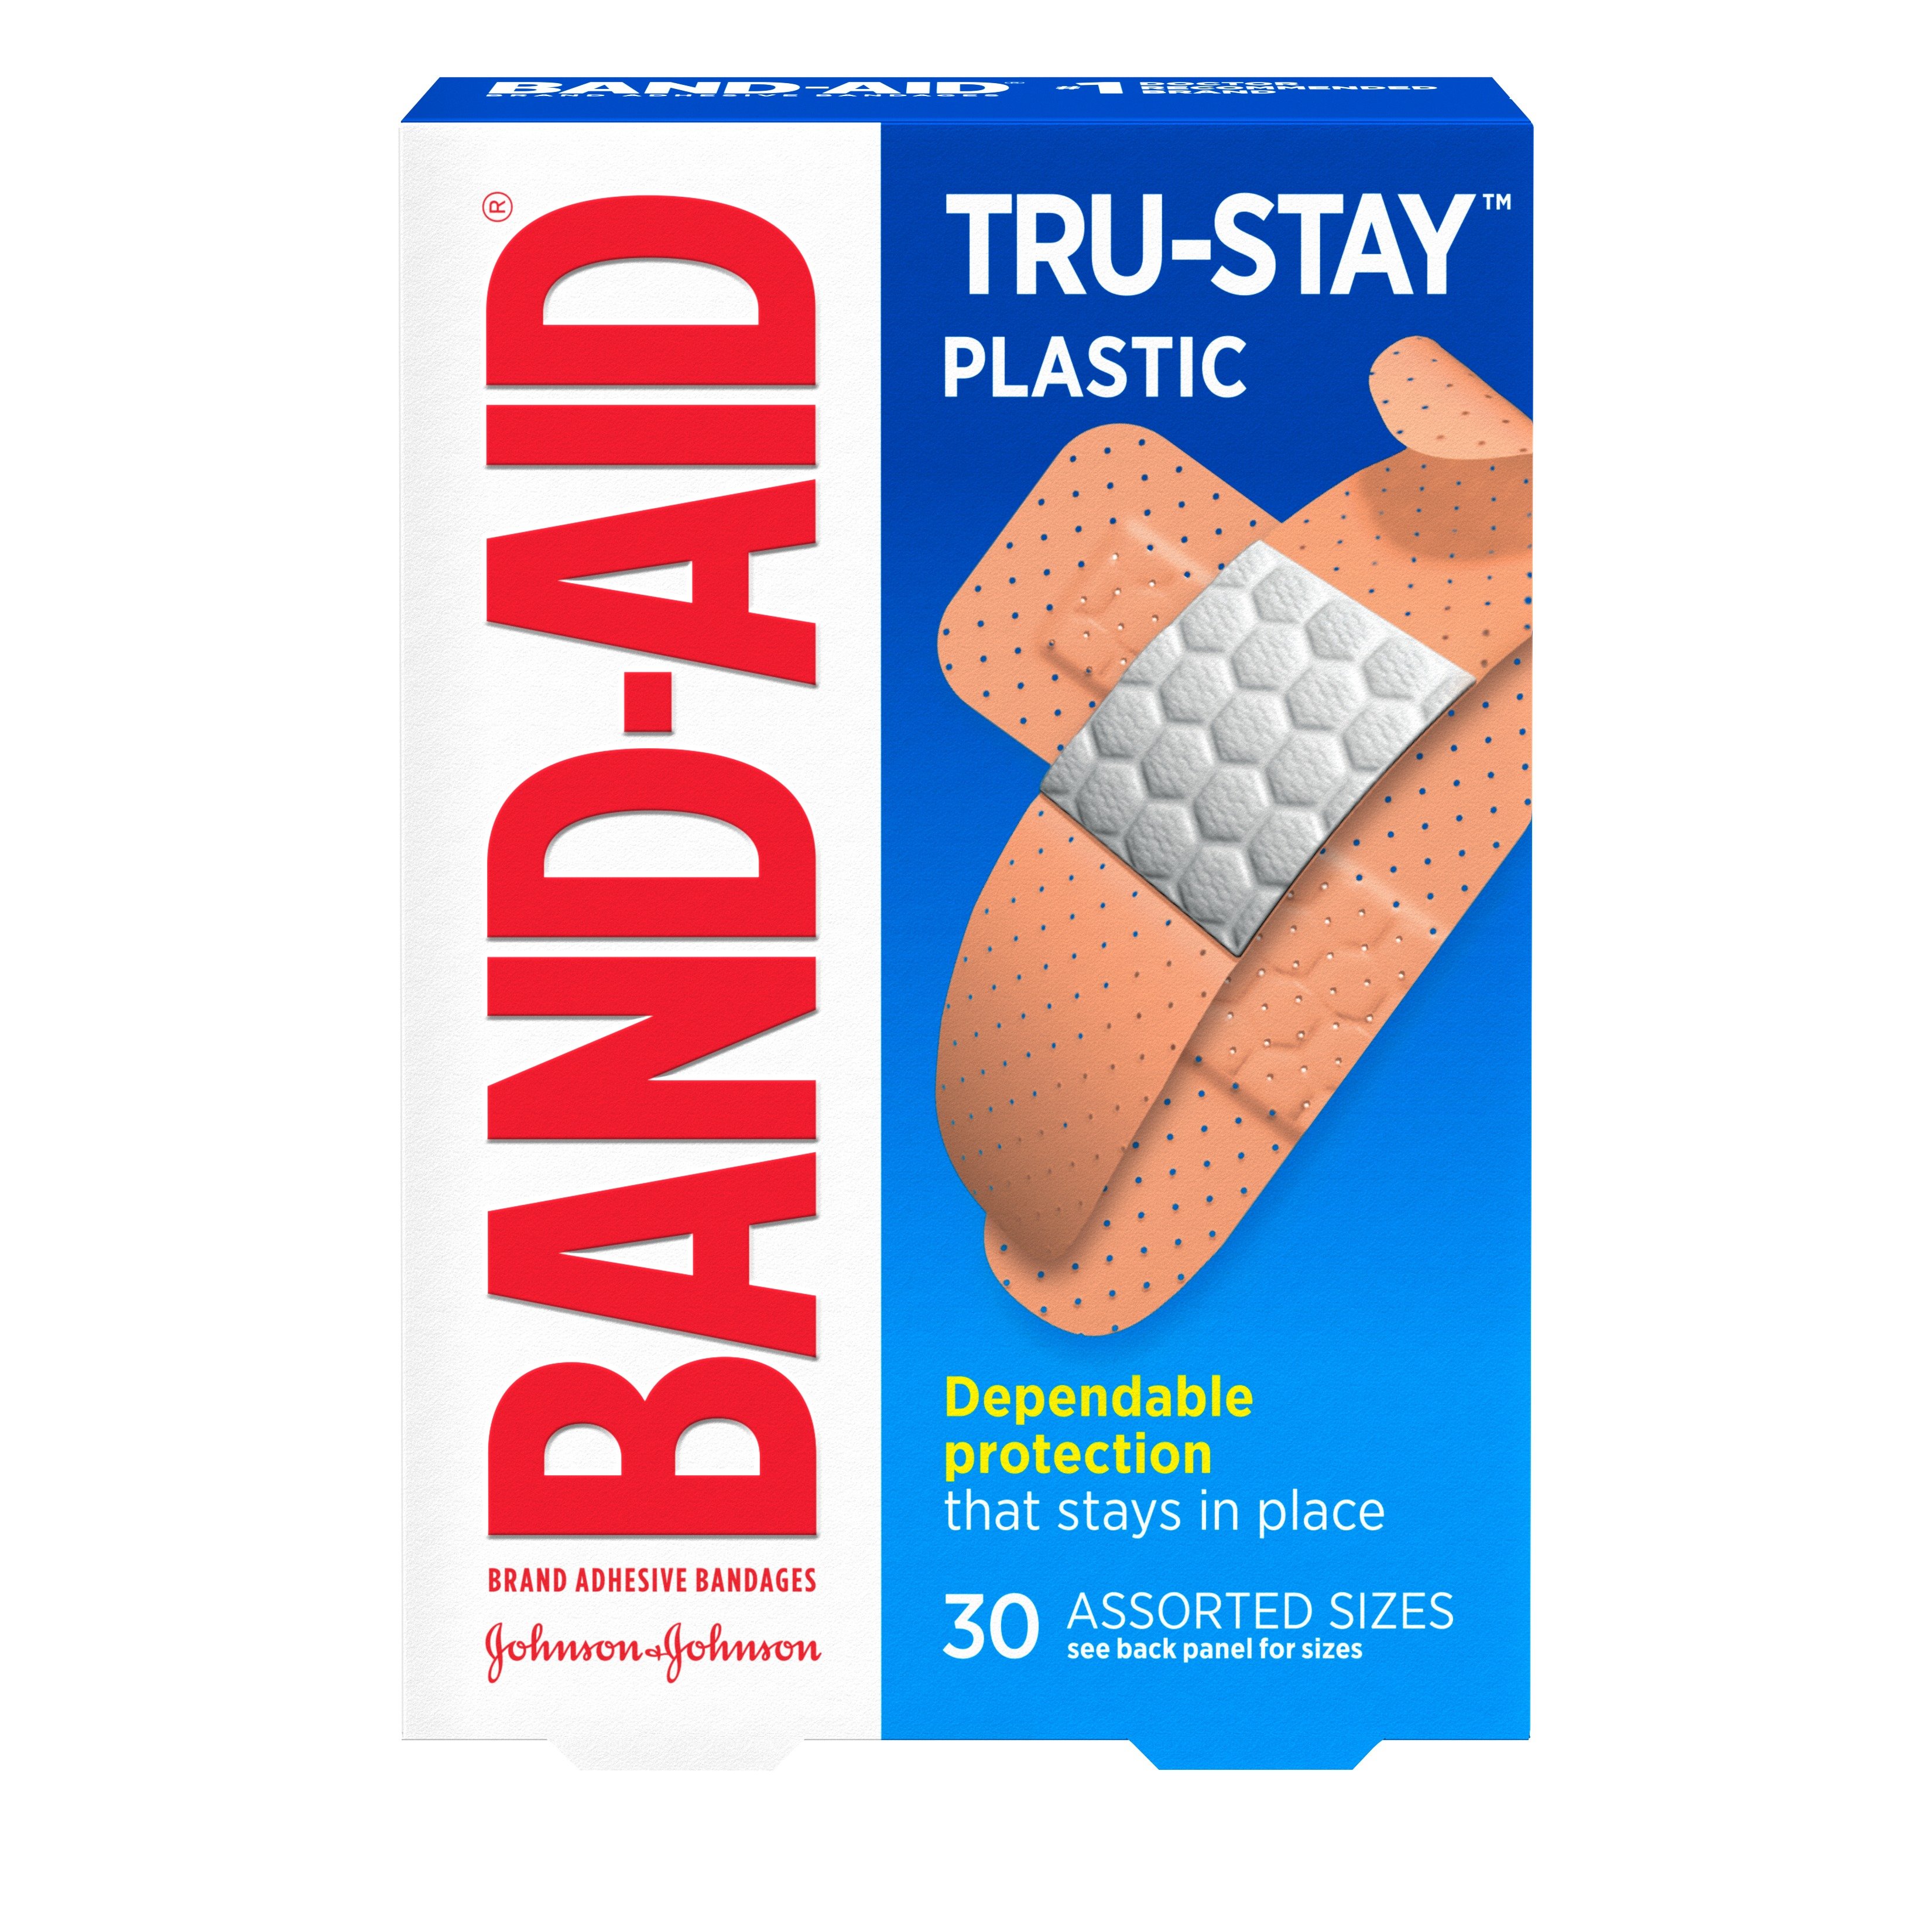 Helpful plastic band aid container for Treating Small Wounds